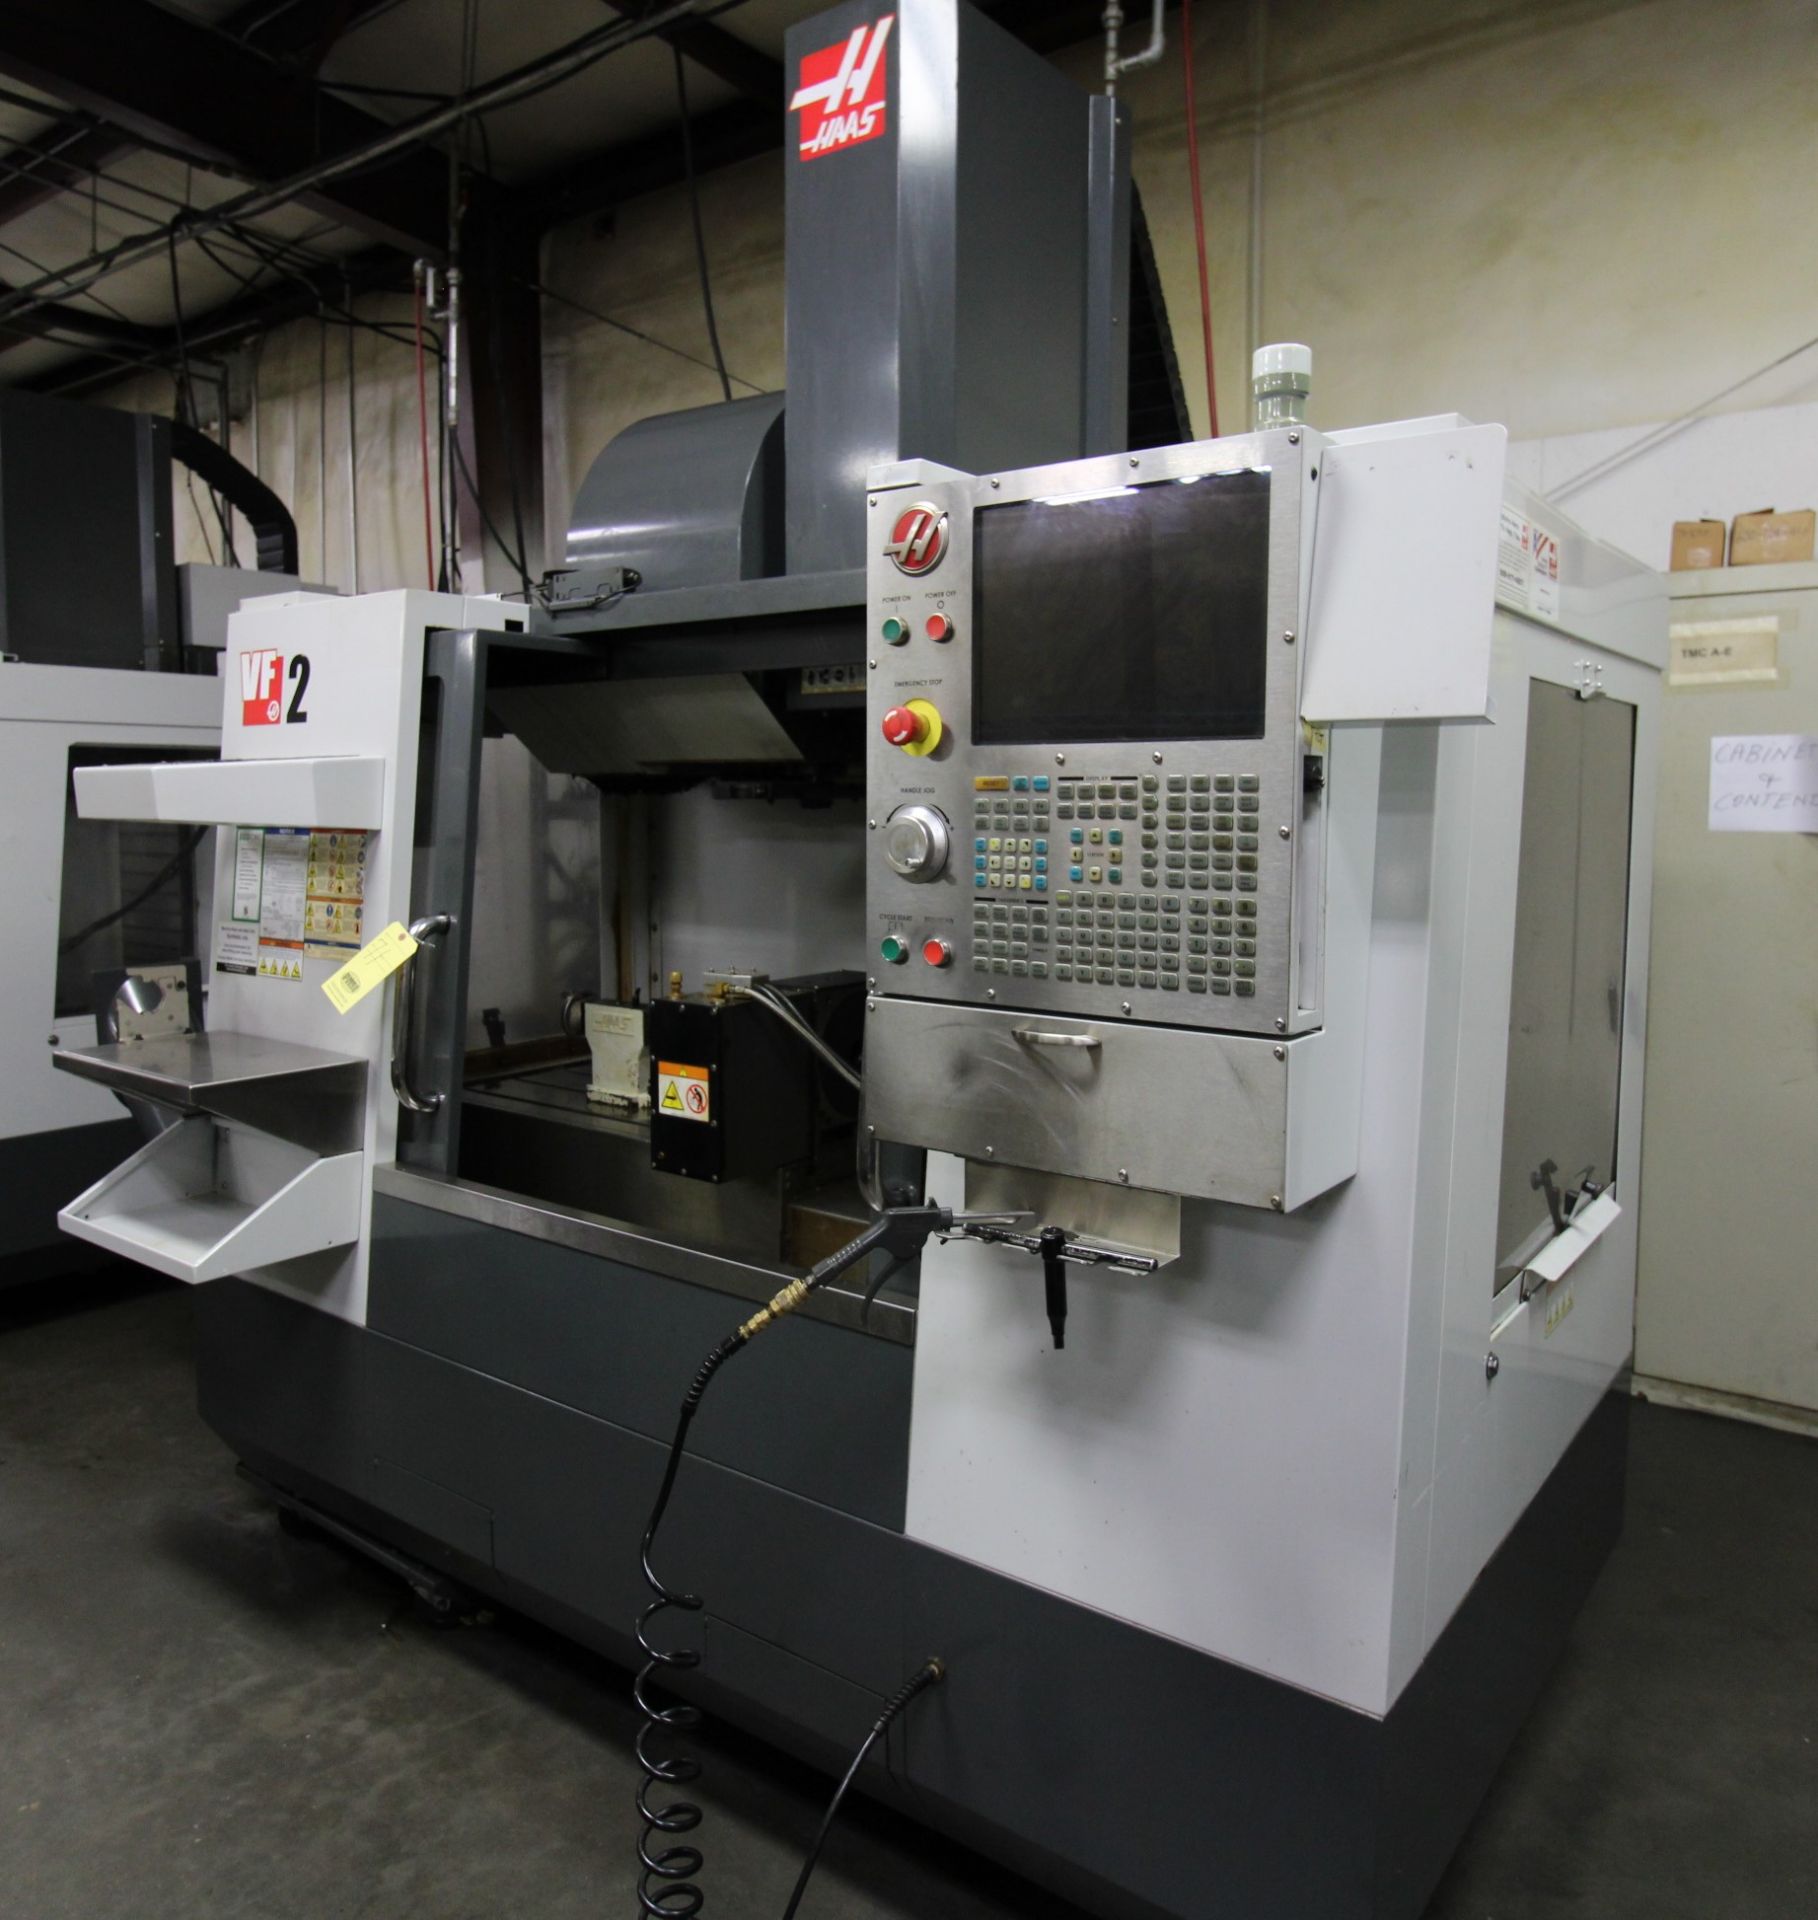 4-AXIS VERTICAL MACHINING CENTER, HAAS MDL. VF2, new 9/2011, 36” x 14” table, 30” X, 16” Y, 20” Z-